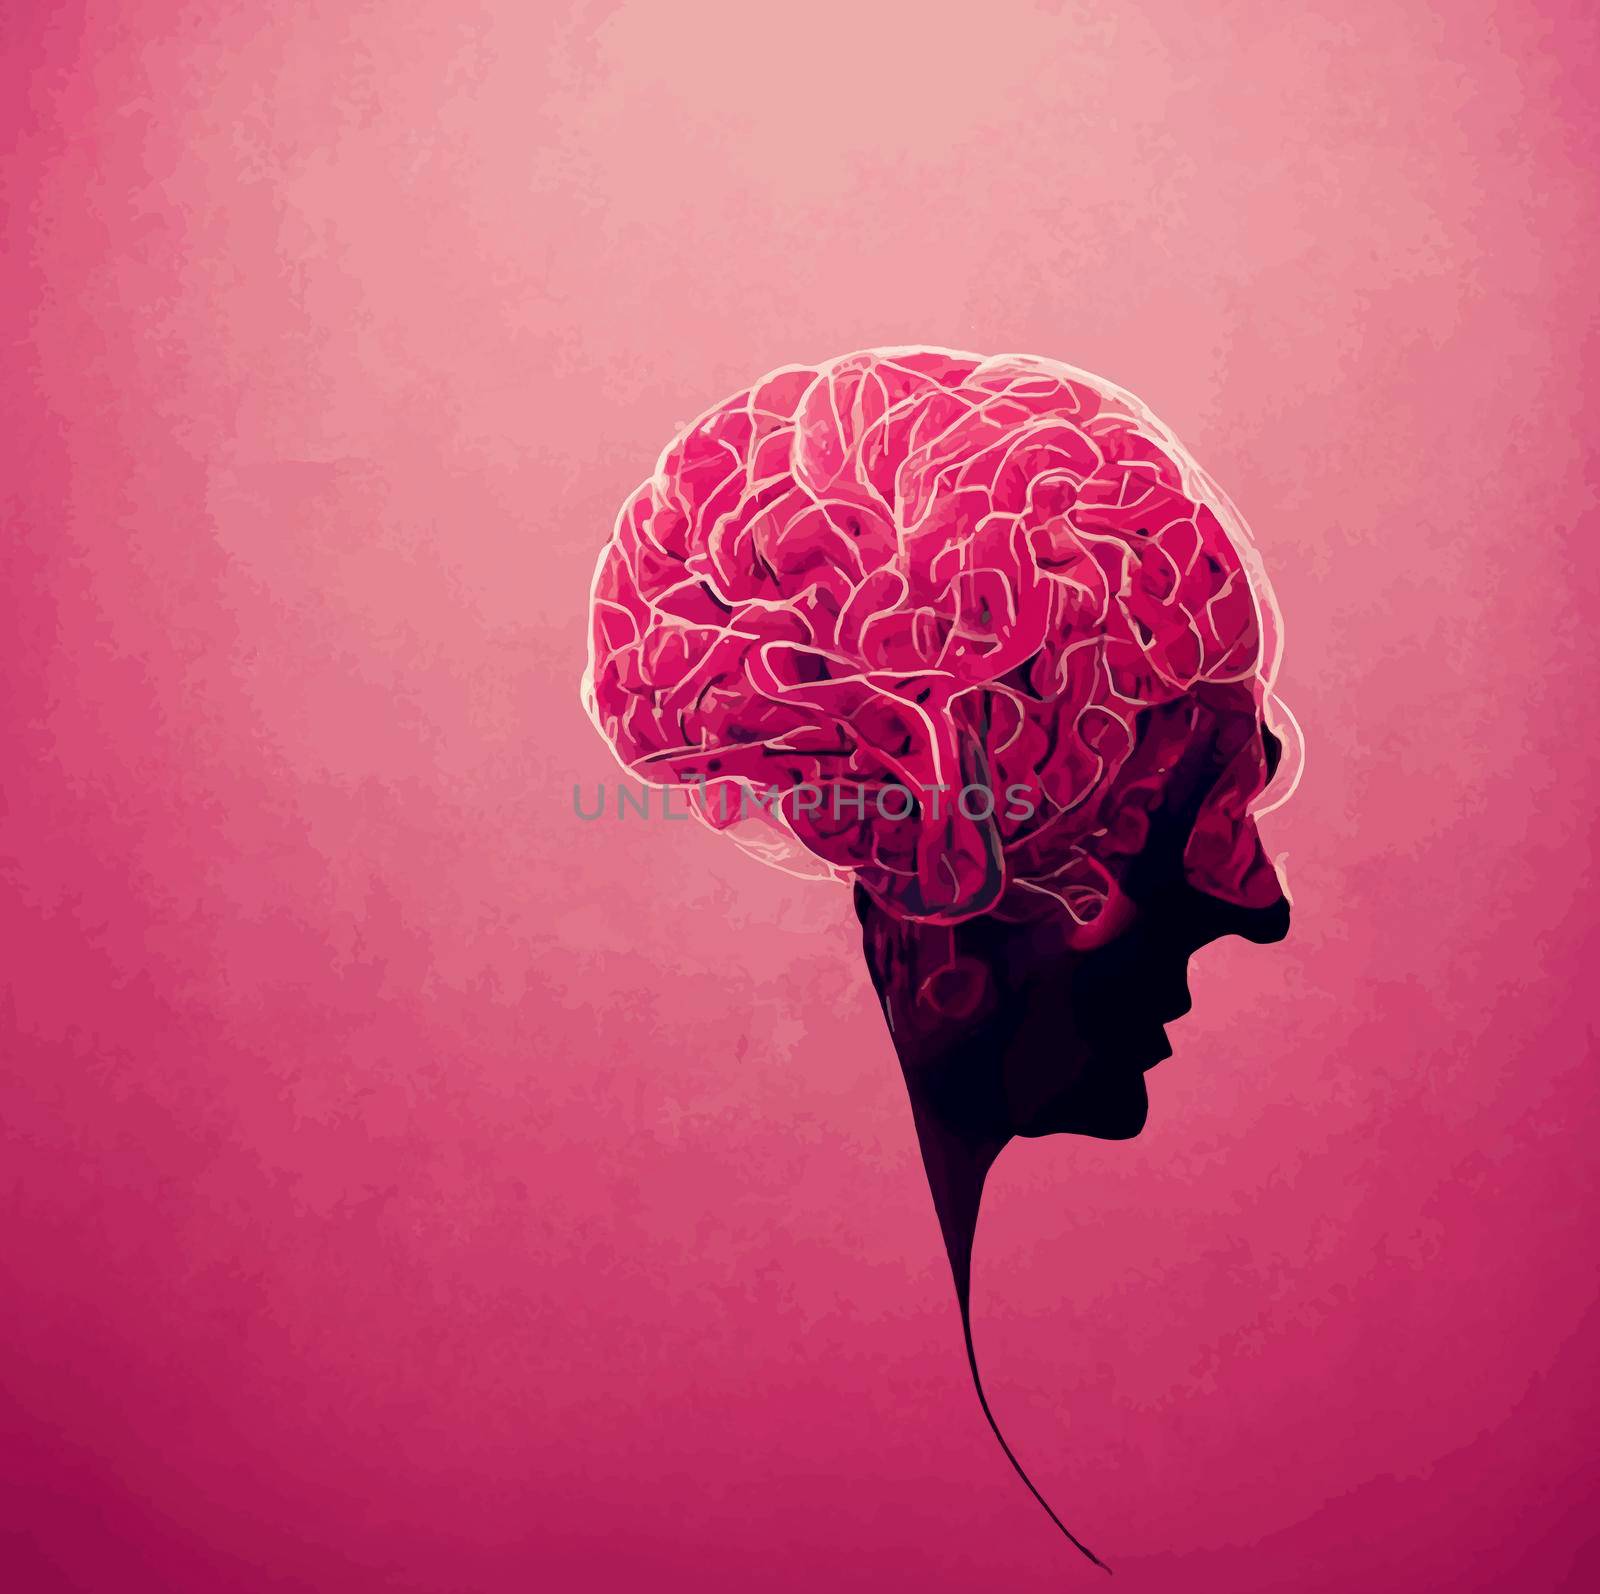 illustration of the human brain. pink 2d illustration of the human brain by JpRamos